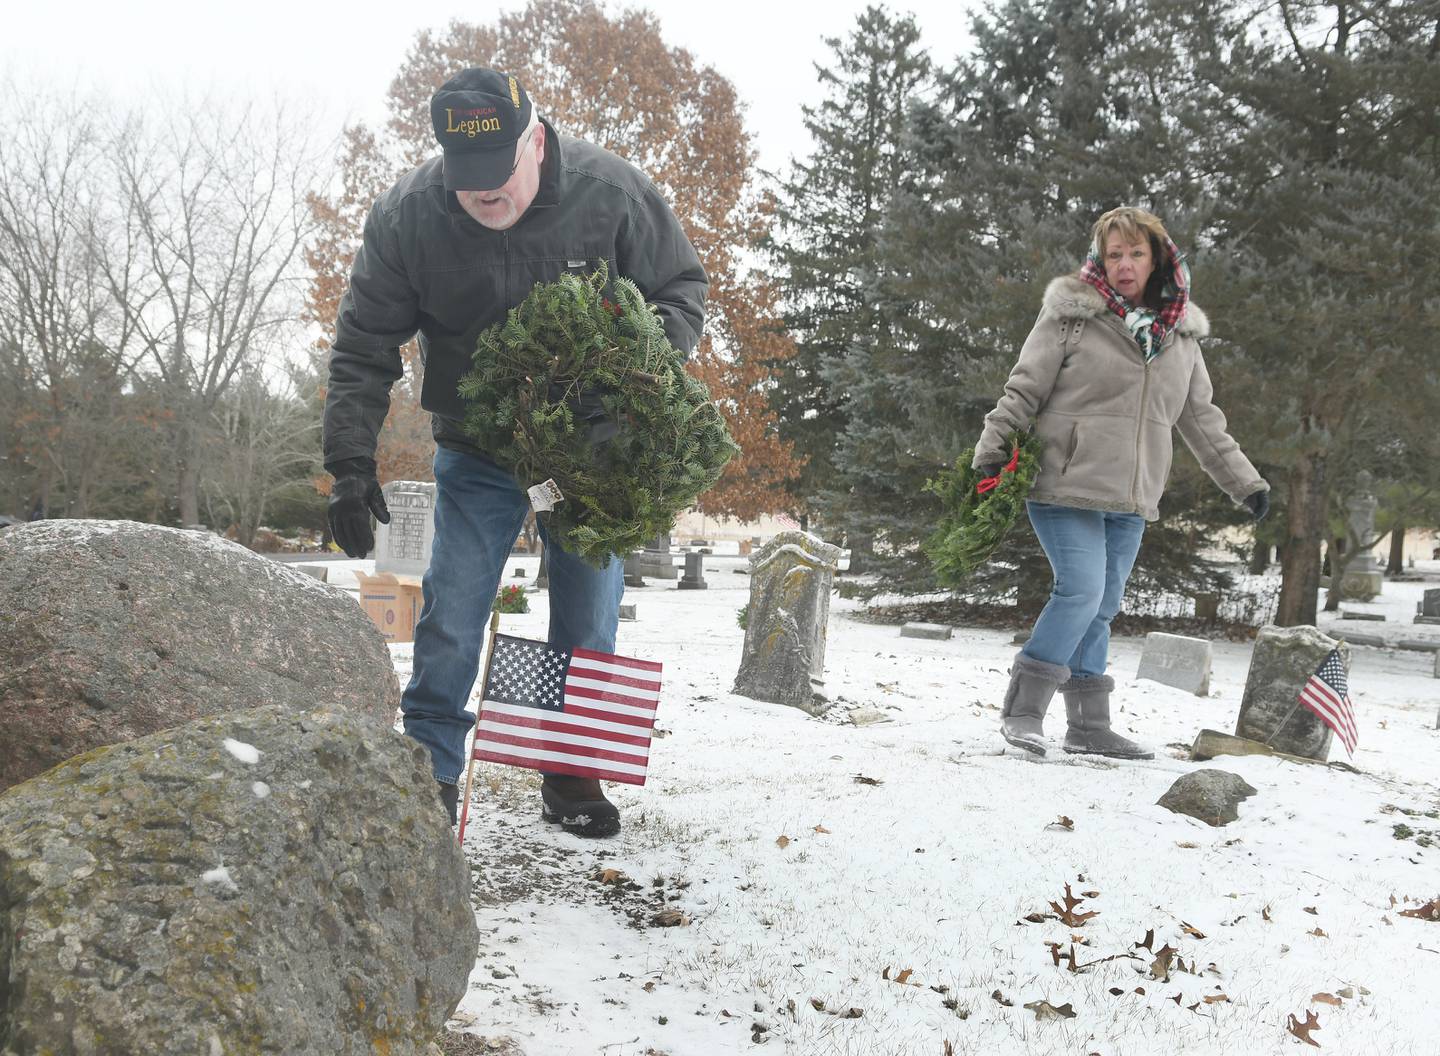 Bill and Stephanie Nelson of Oregon lay wreaths on veterans' graves at Daysville Cemetery on Dec. 17 during the Wreaths Across America project. Bill was laying a wreath on  the grave of Virgil Reed who fought in the Civil War.